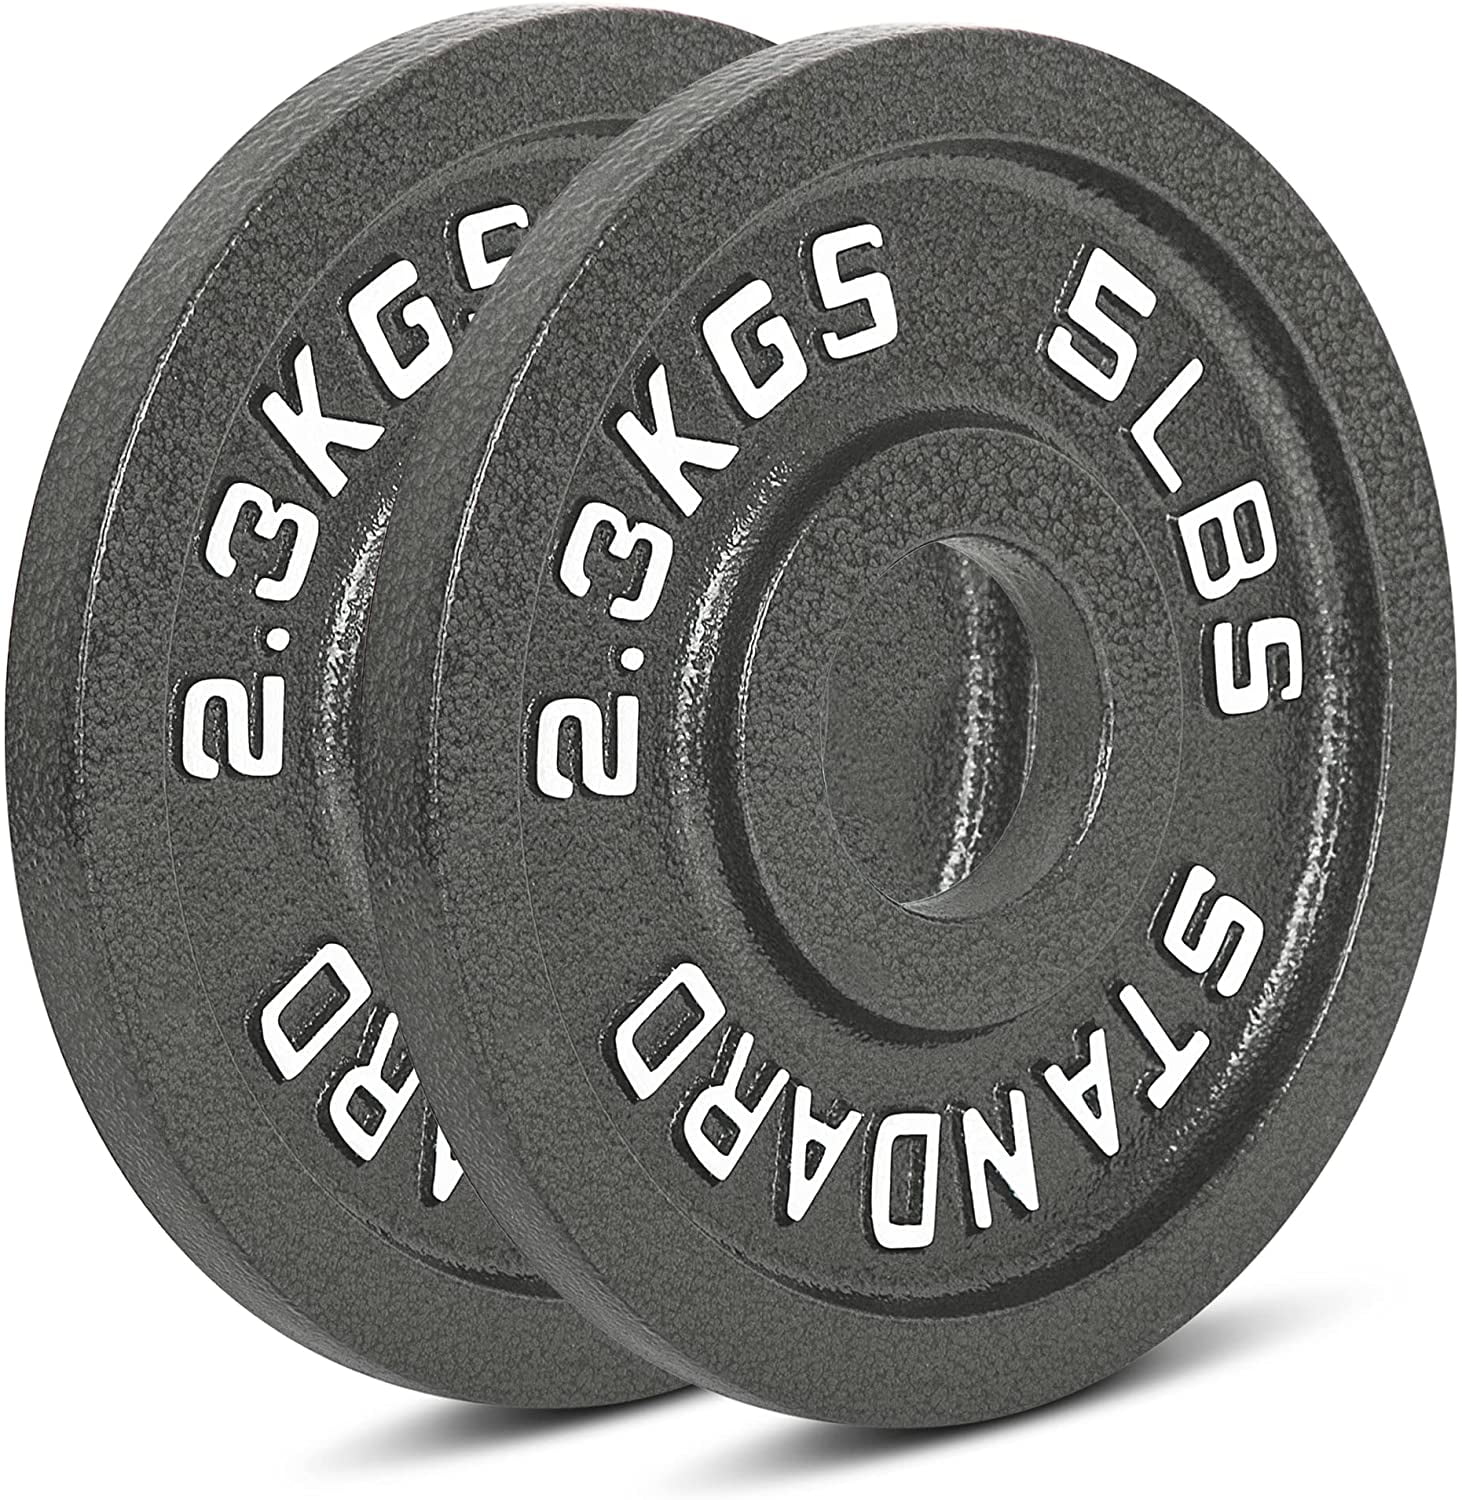 5.5LB,11LB,16.5LB BRAND NEW PAIR Standard 1" Olympic Weights Plates